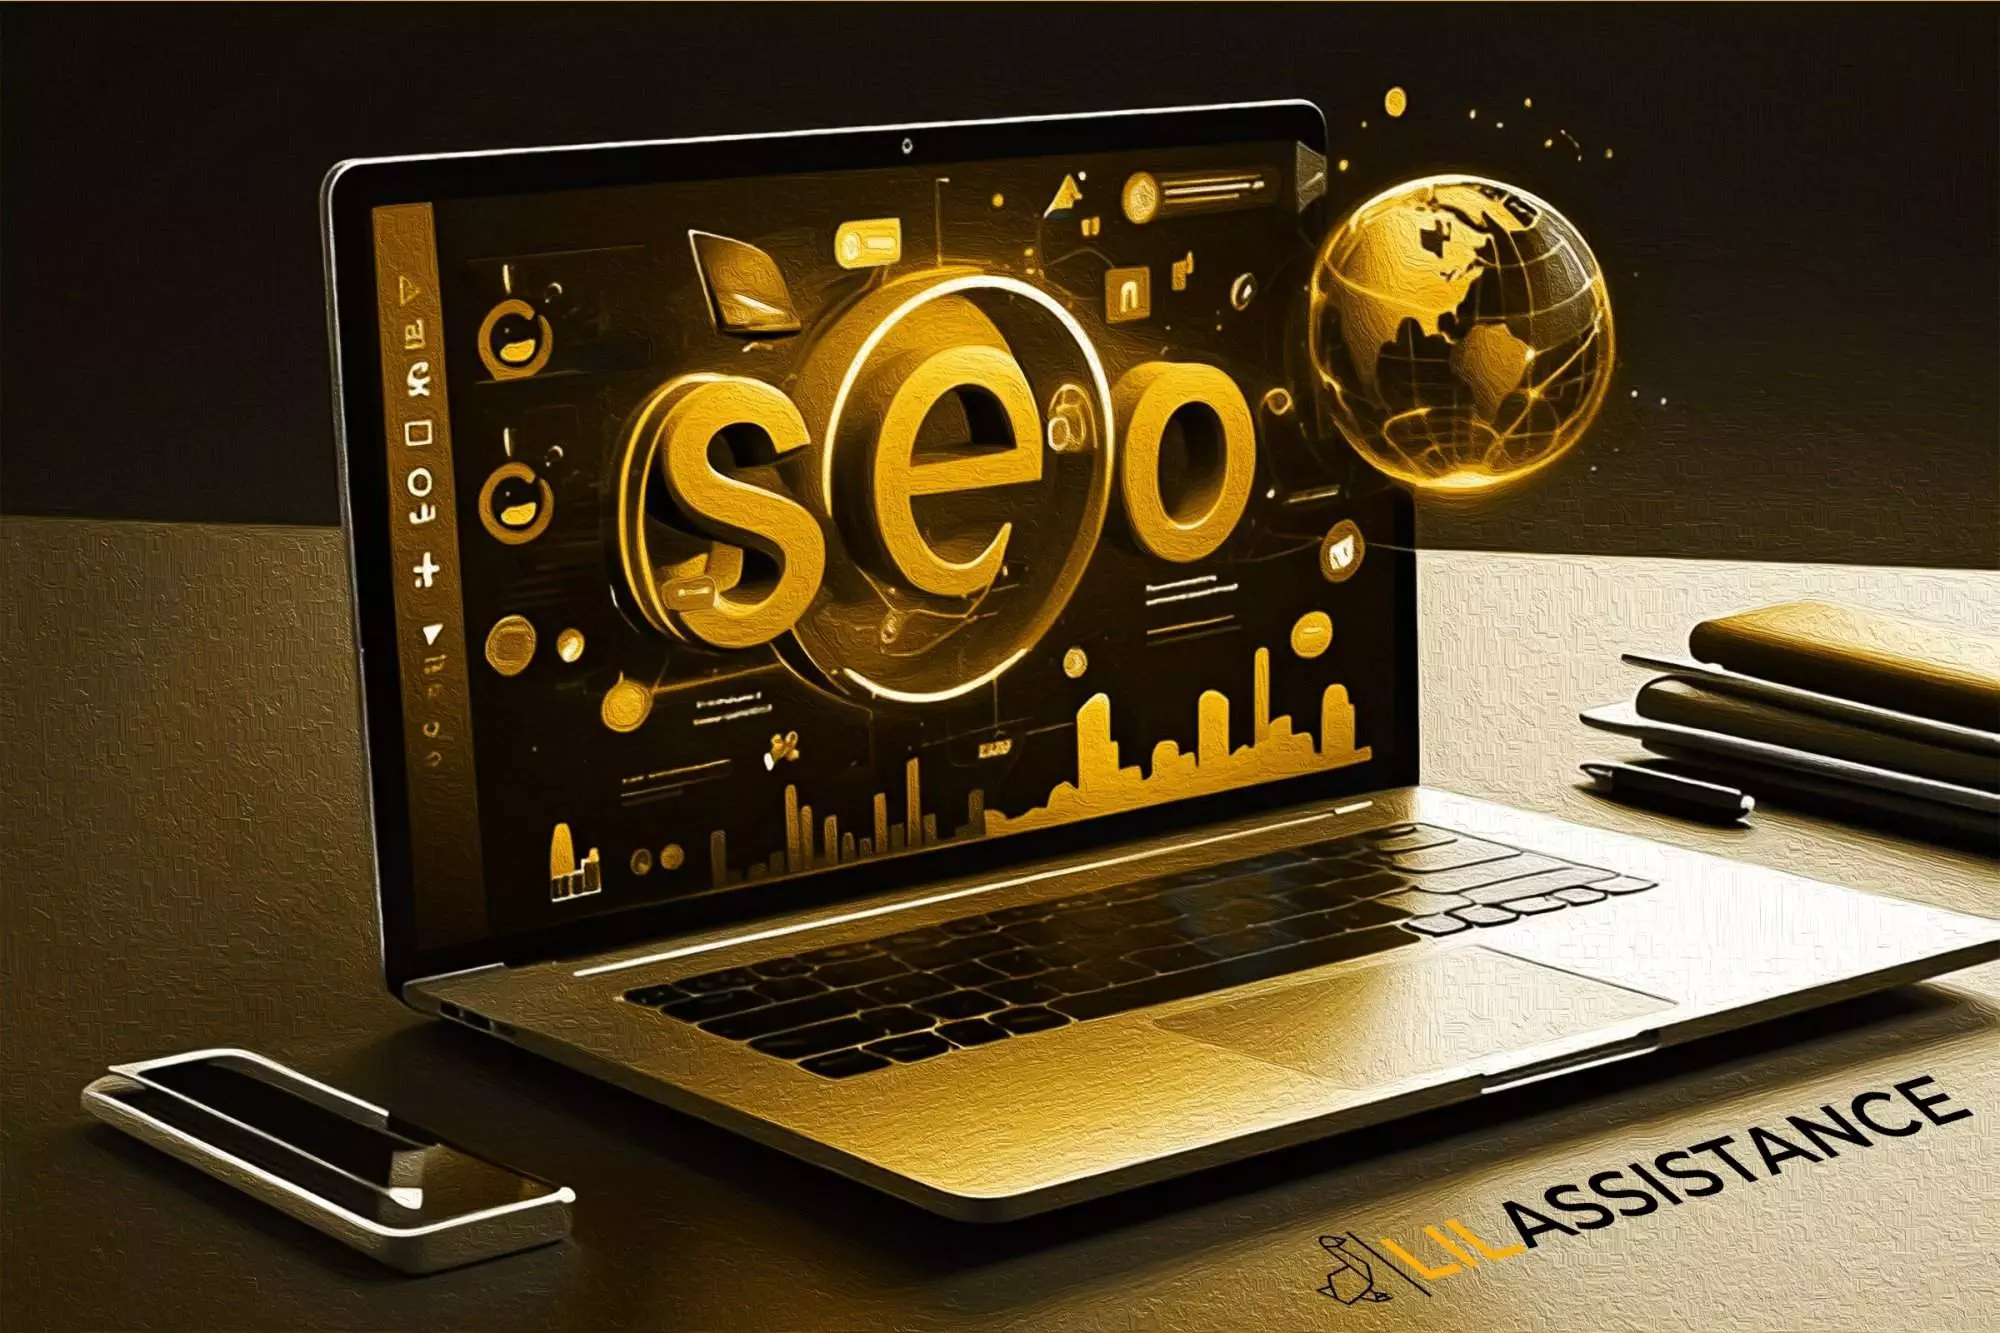 Laptop displaying SEO tools with global impact visuals and Lil Assistance branding